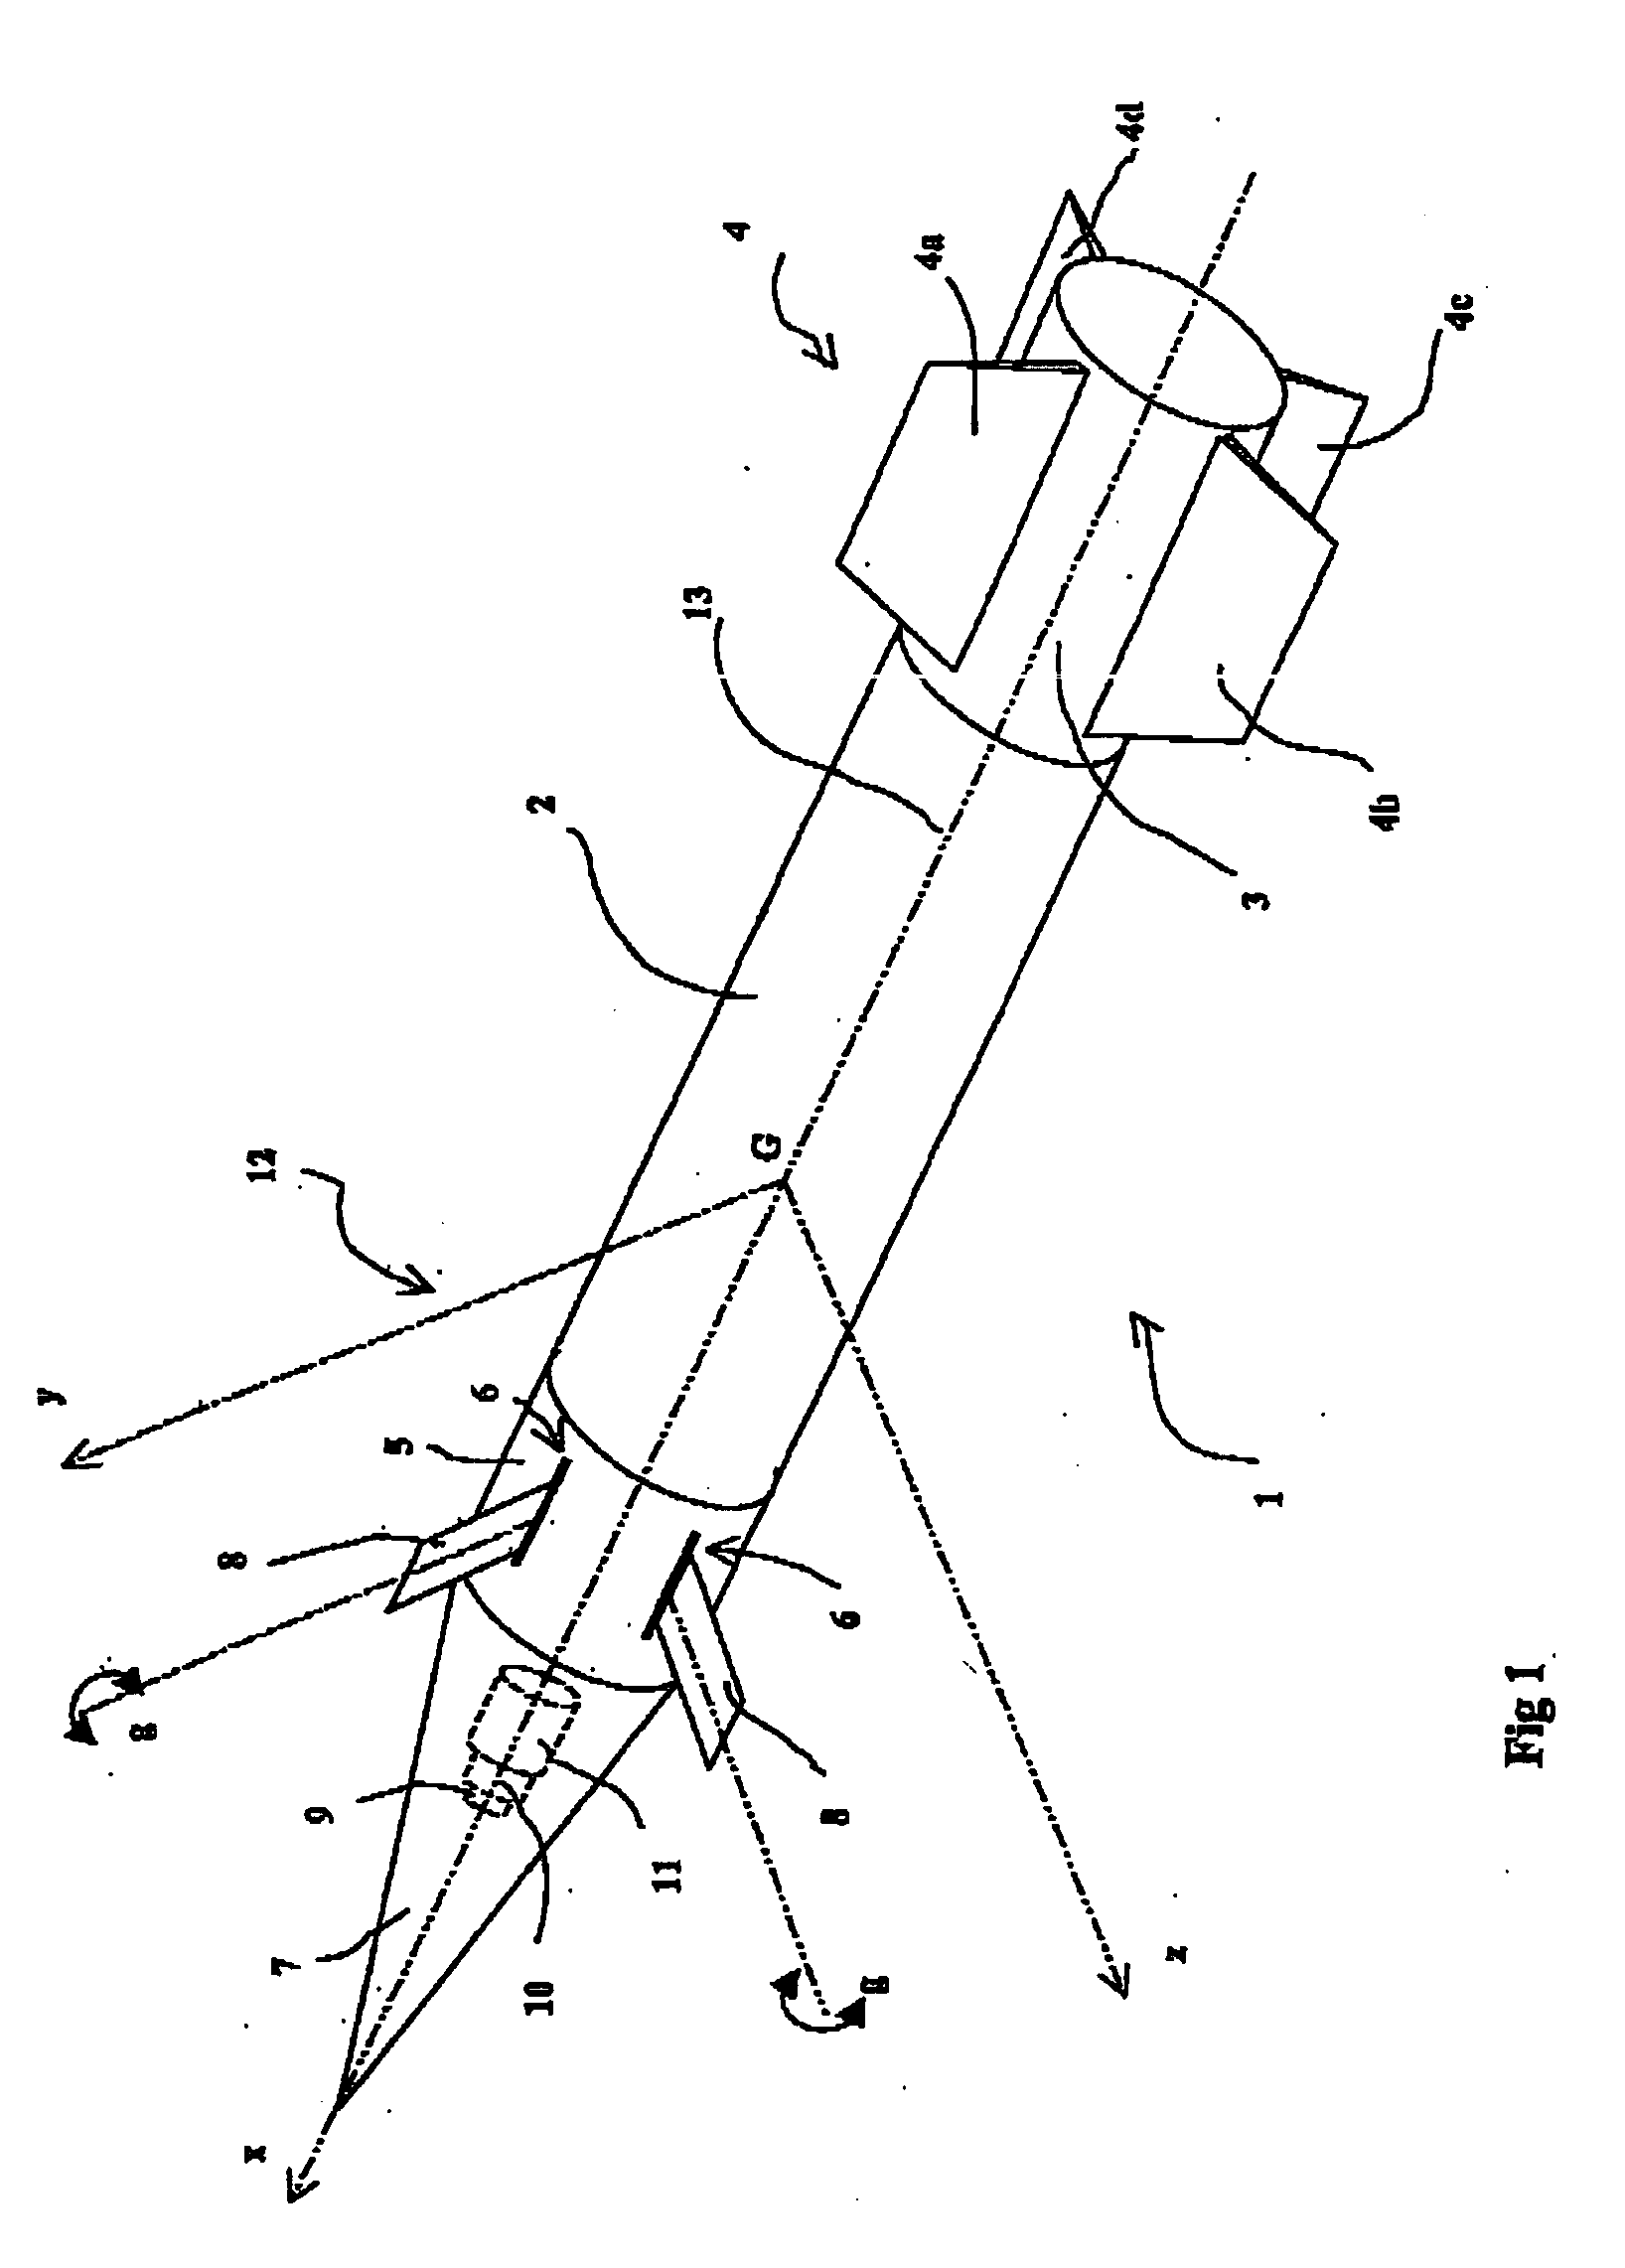 Process to control the trajectory of a spinning projectile